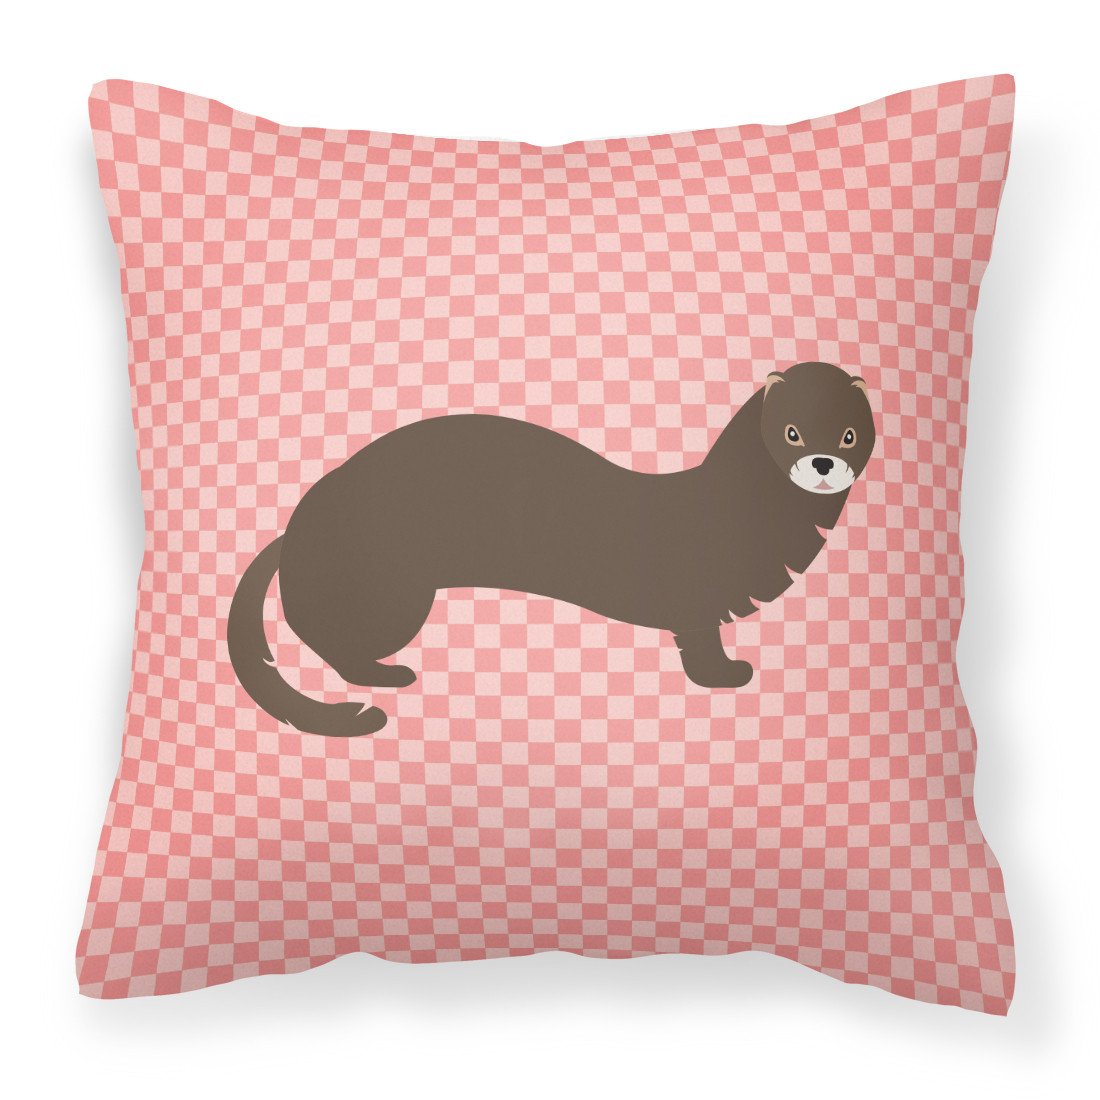 Russian or European Mink Pink Check Fabric Decorative Pillow BB7868PW1818 by Caroline's Treasures